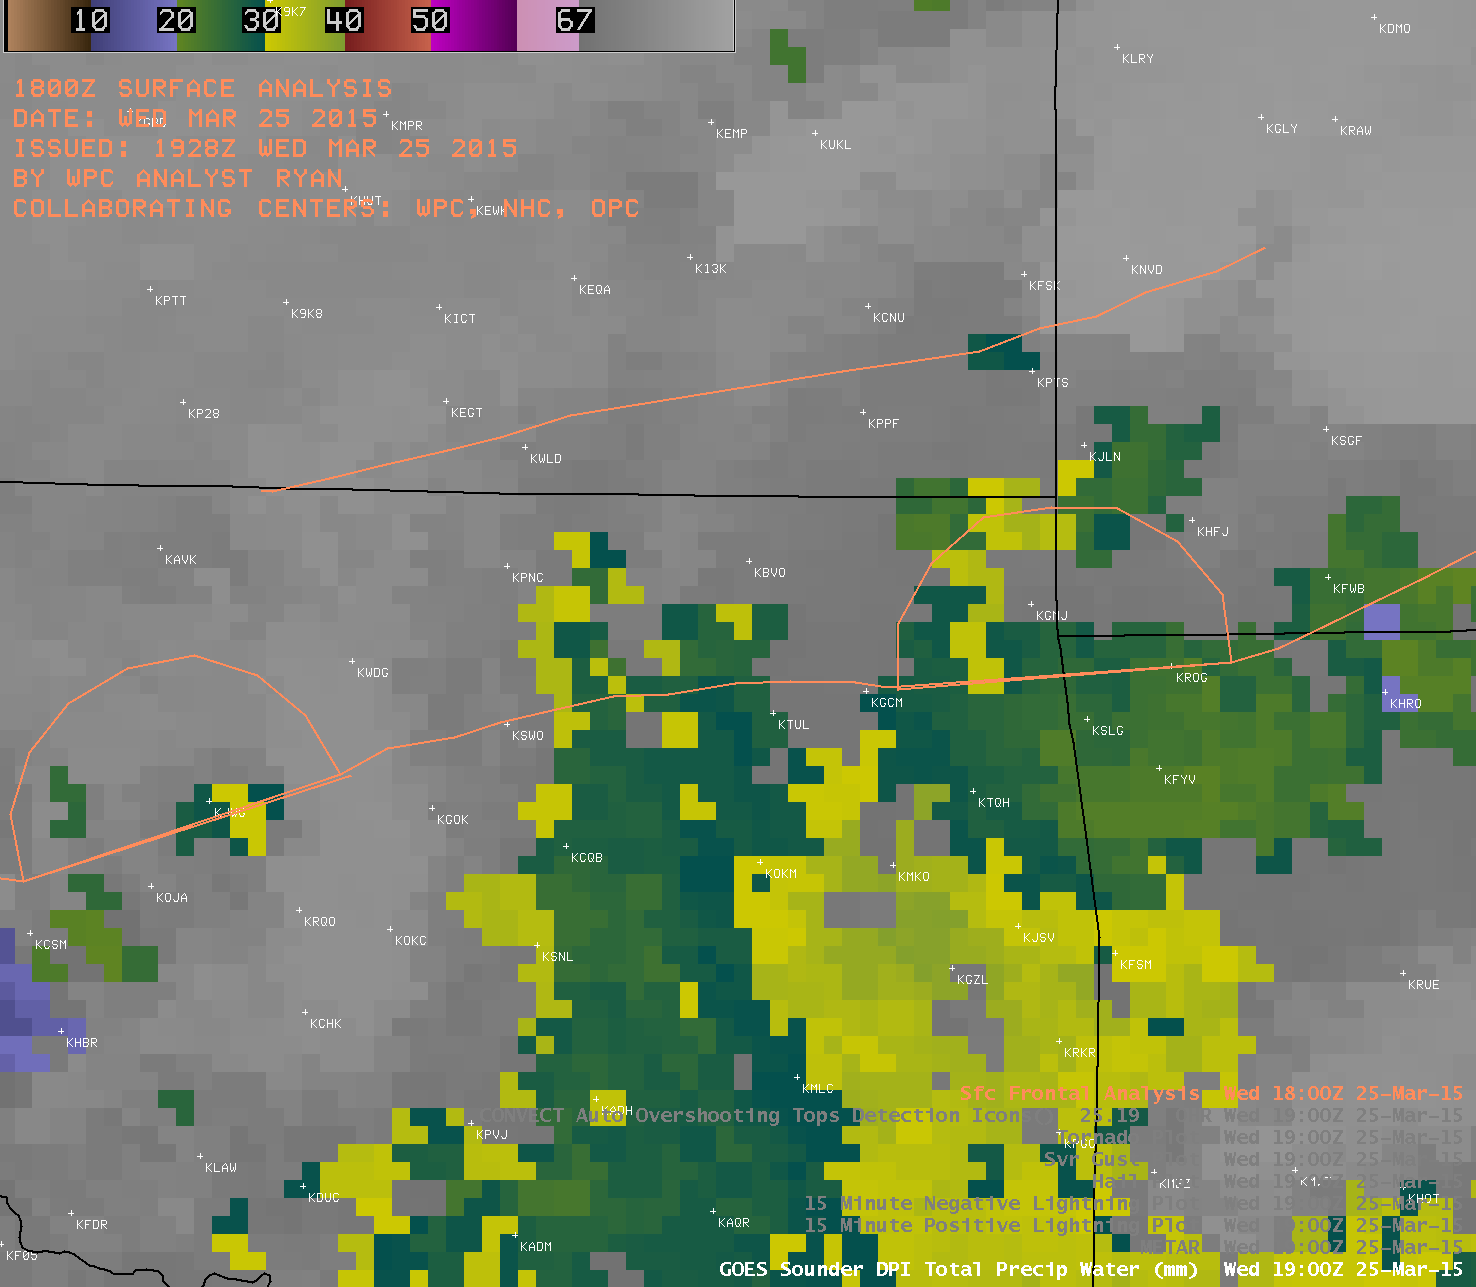 GOES-13 sounder Total Precipitable Water derived product imagery (click to play animation)